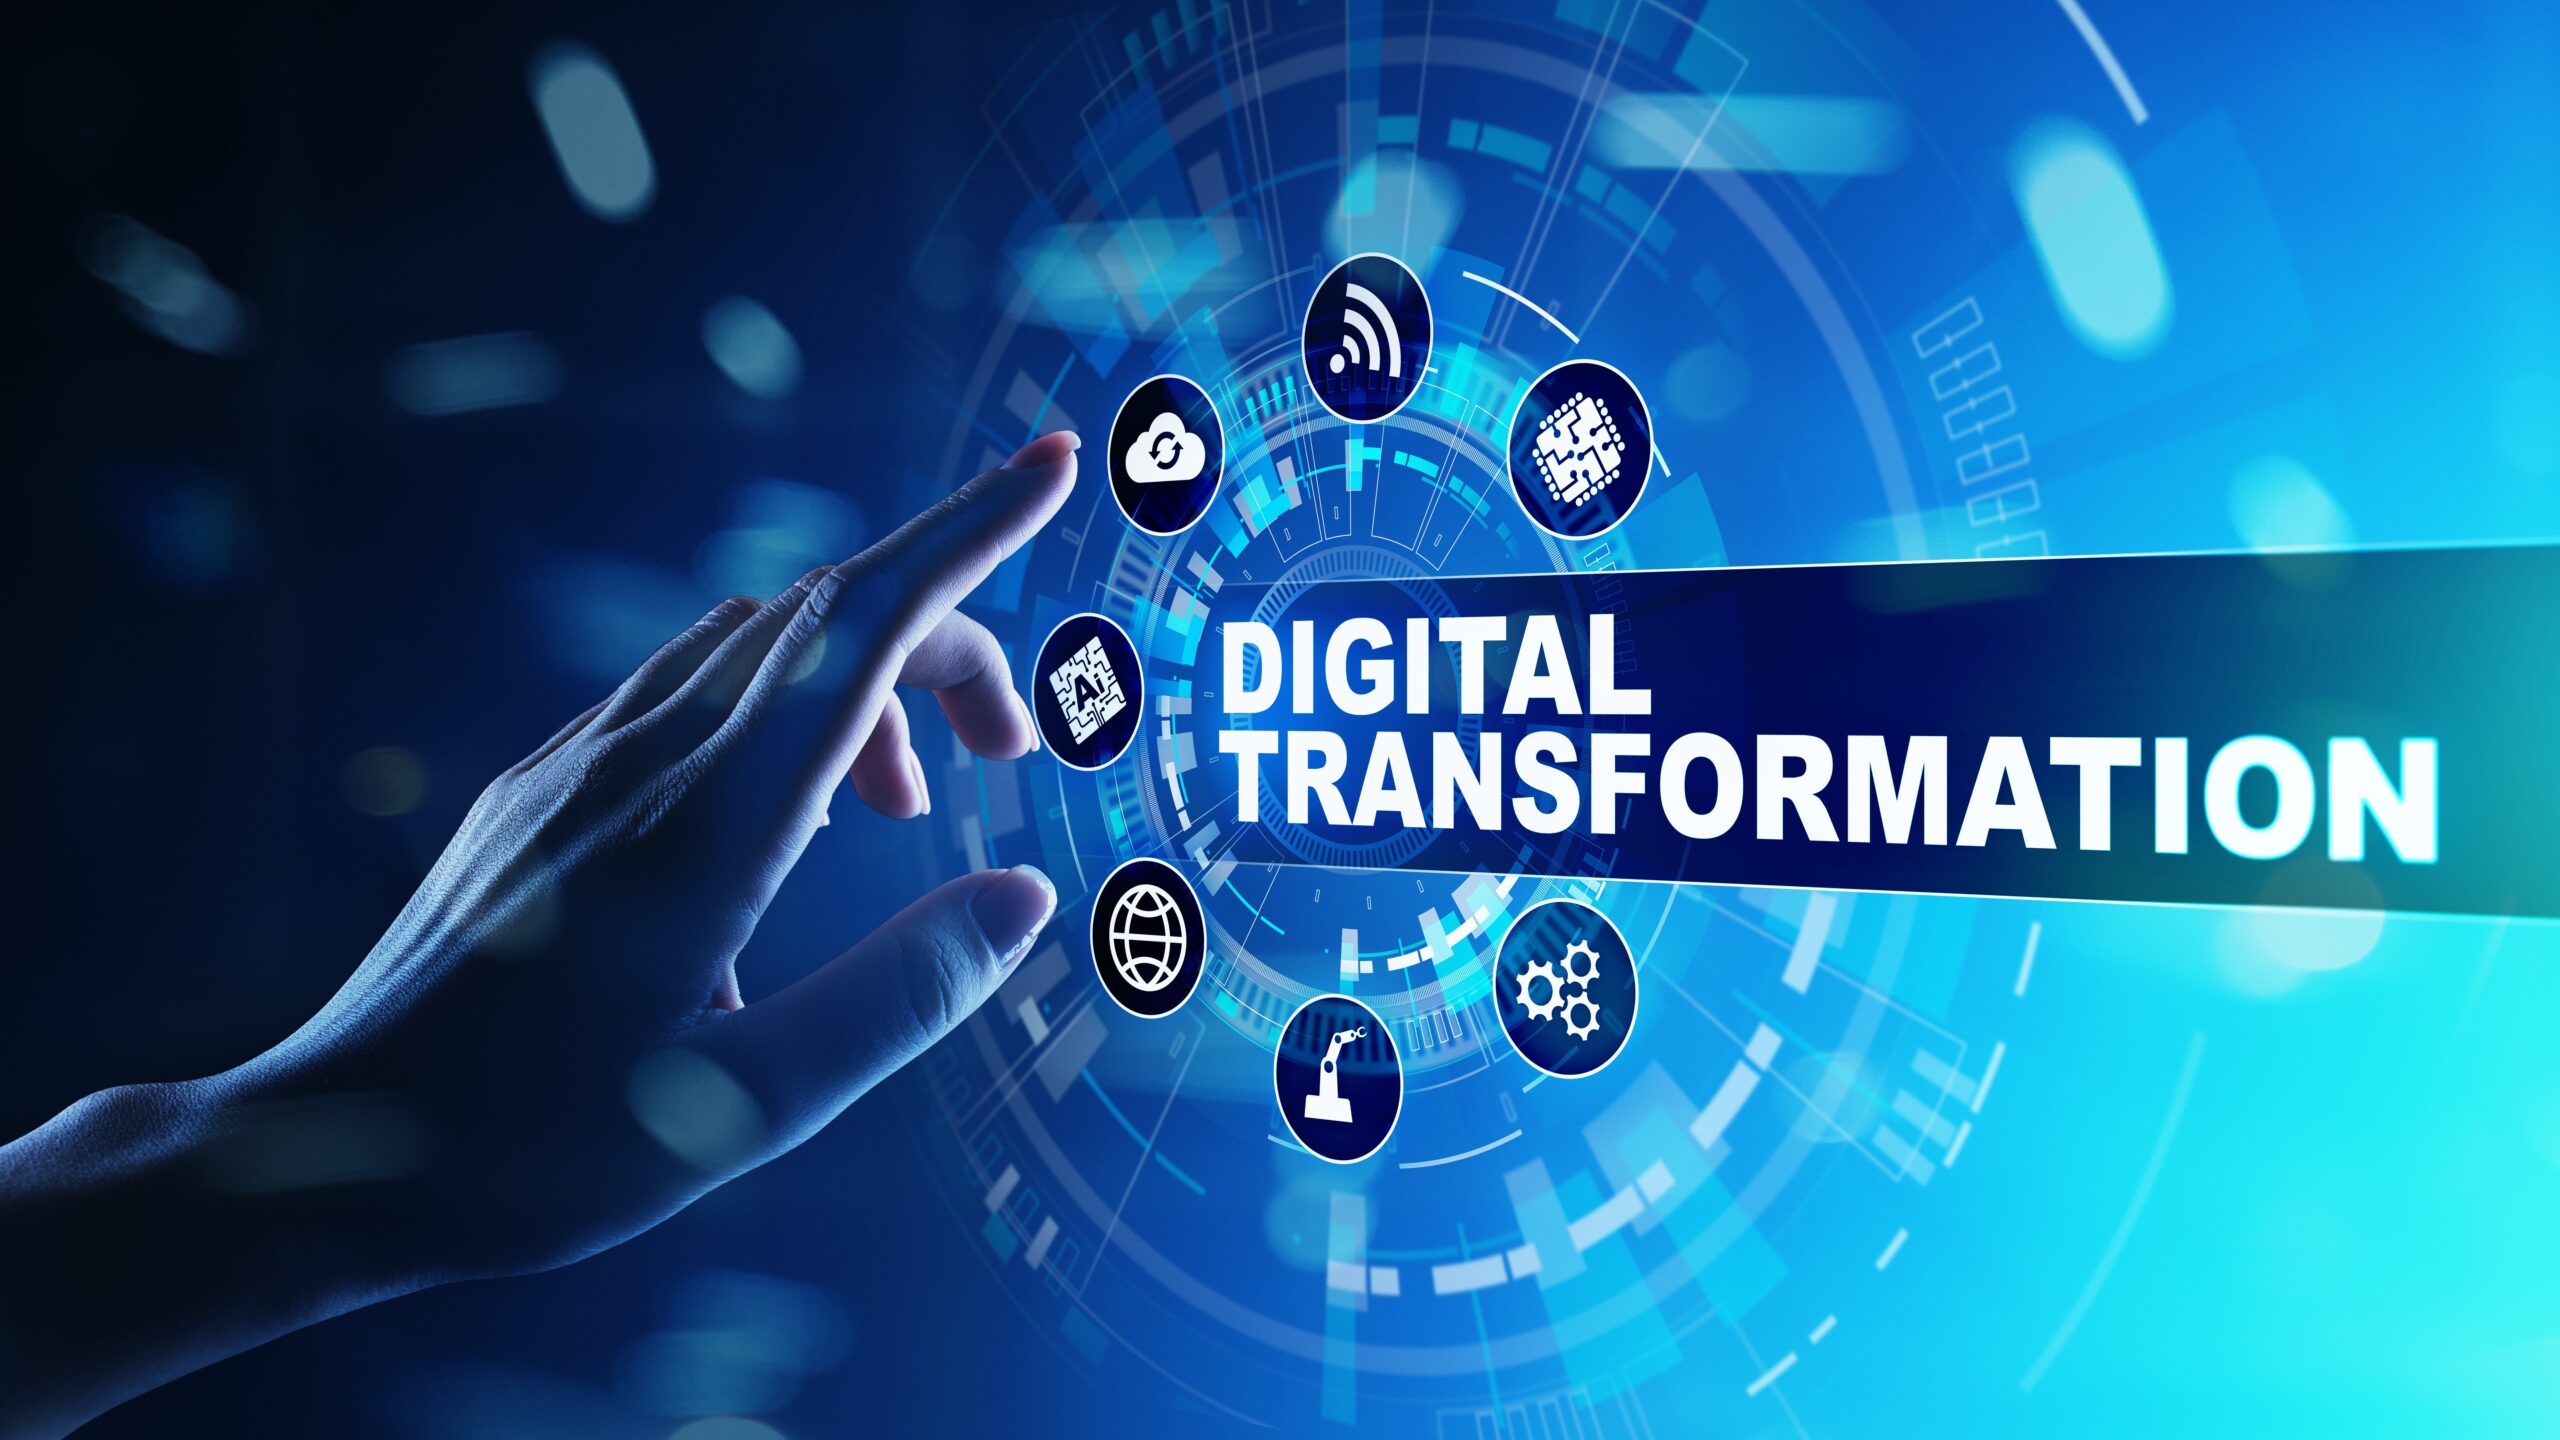 How to Achieve Digital Transformation that Sustains, Scales and Creates Success